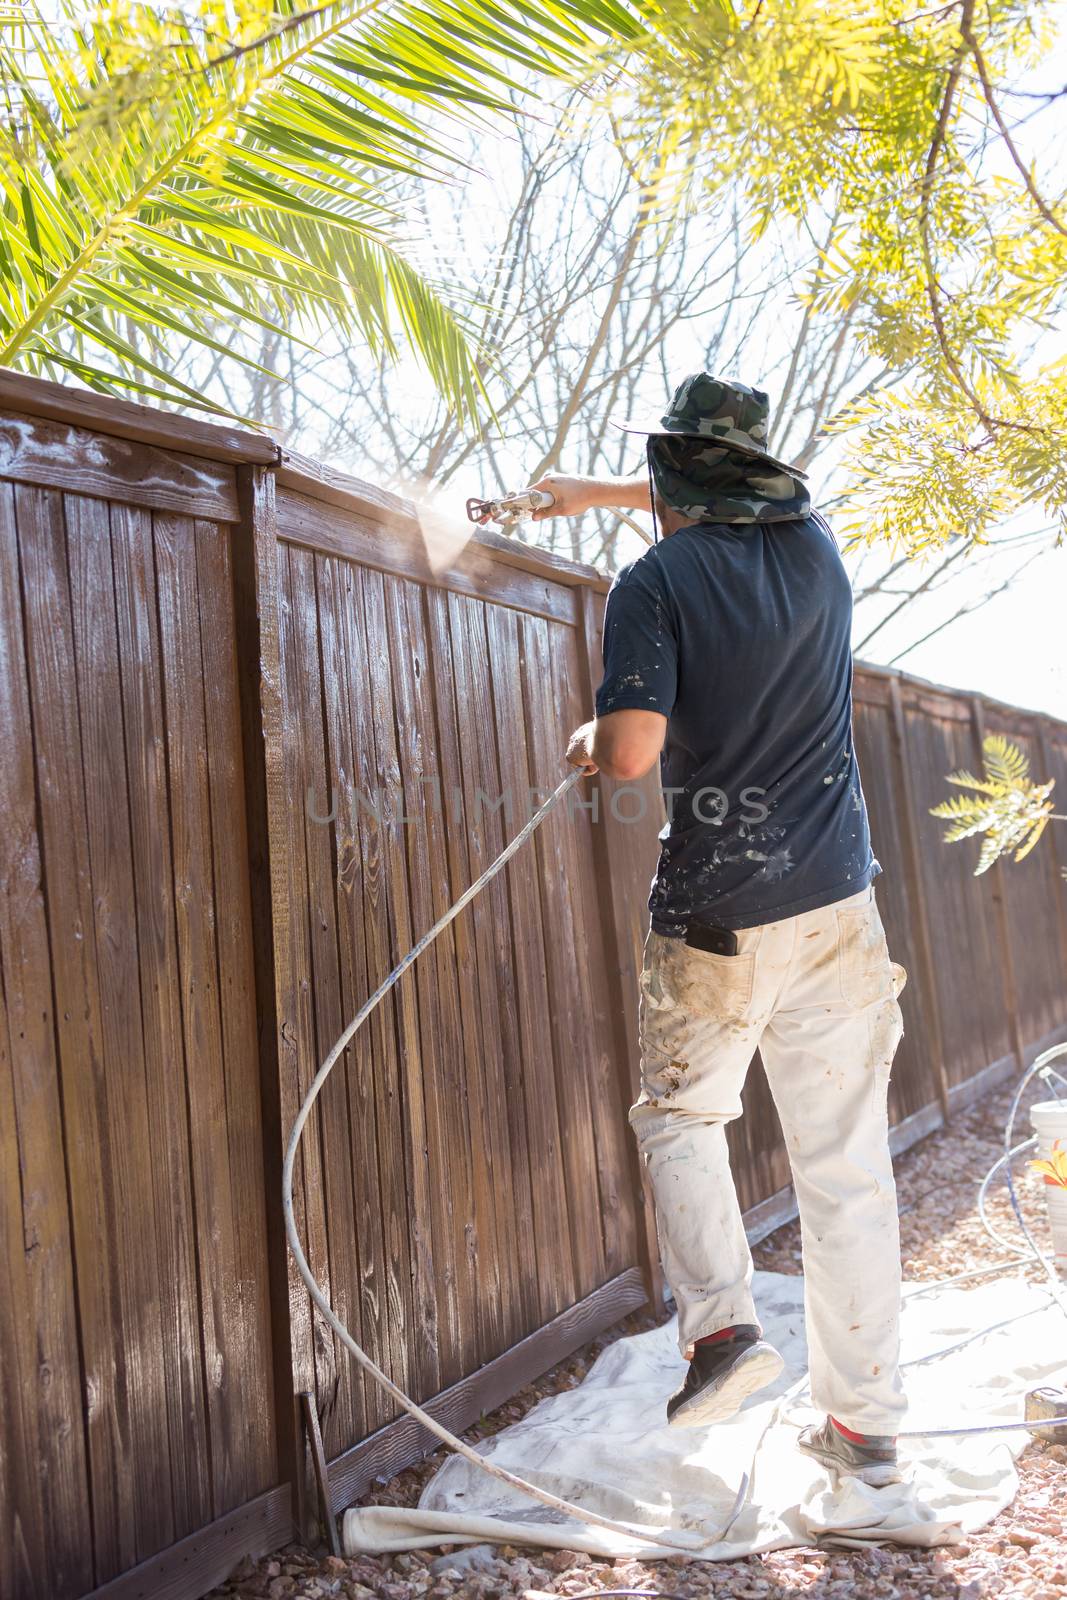 Professional Painter Spraying Yard Fence with Stain by Feverpitched